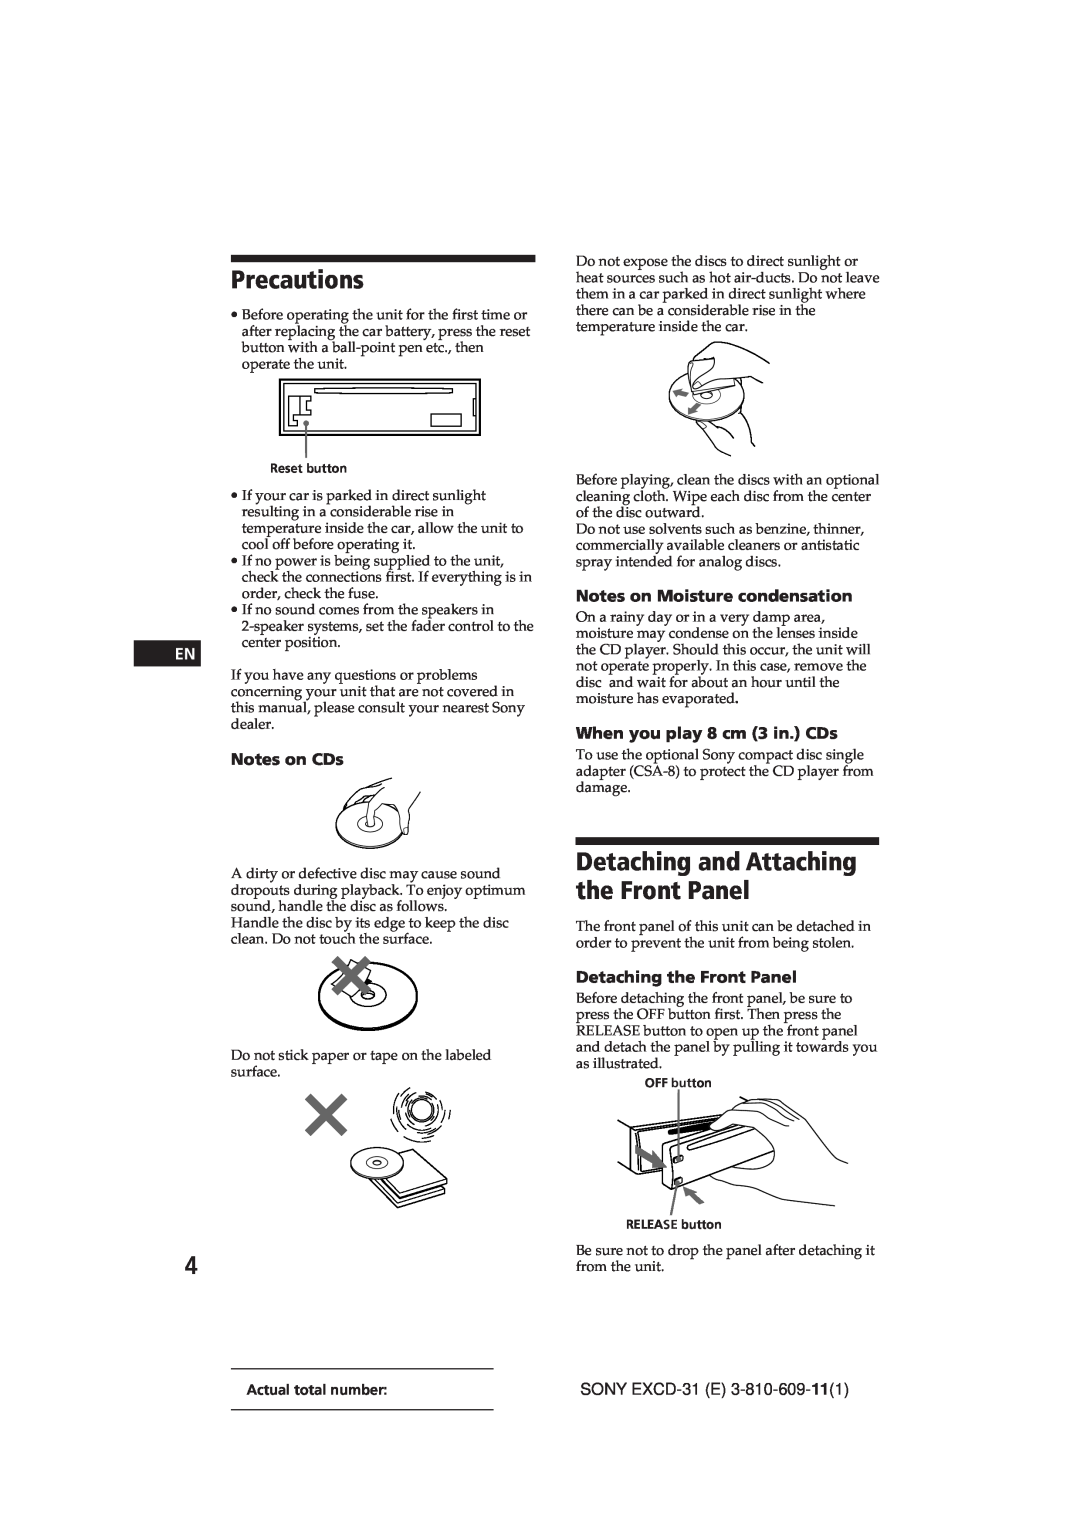 Sony EXCD-31 manual Precautions, Detaching and Attaching the Front Panel, Notes on CDs, Notes on Moisture condensation 